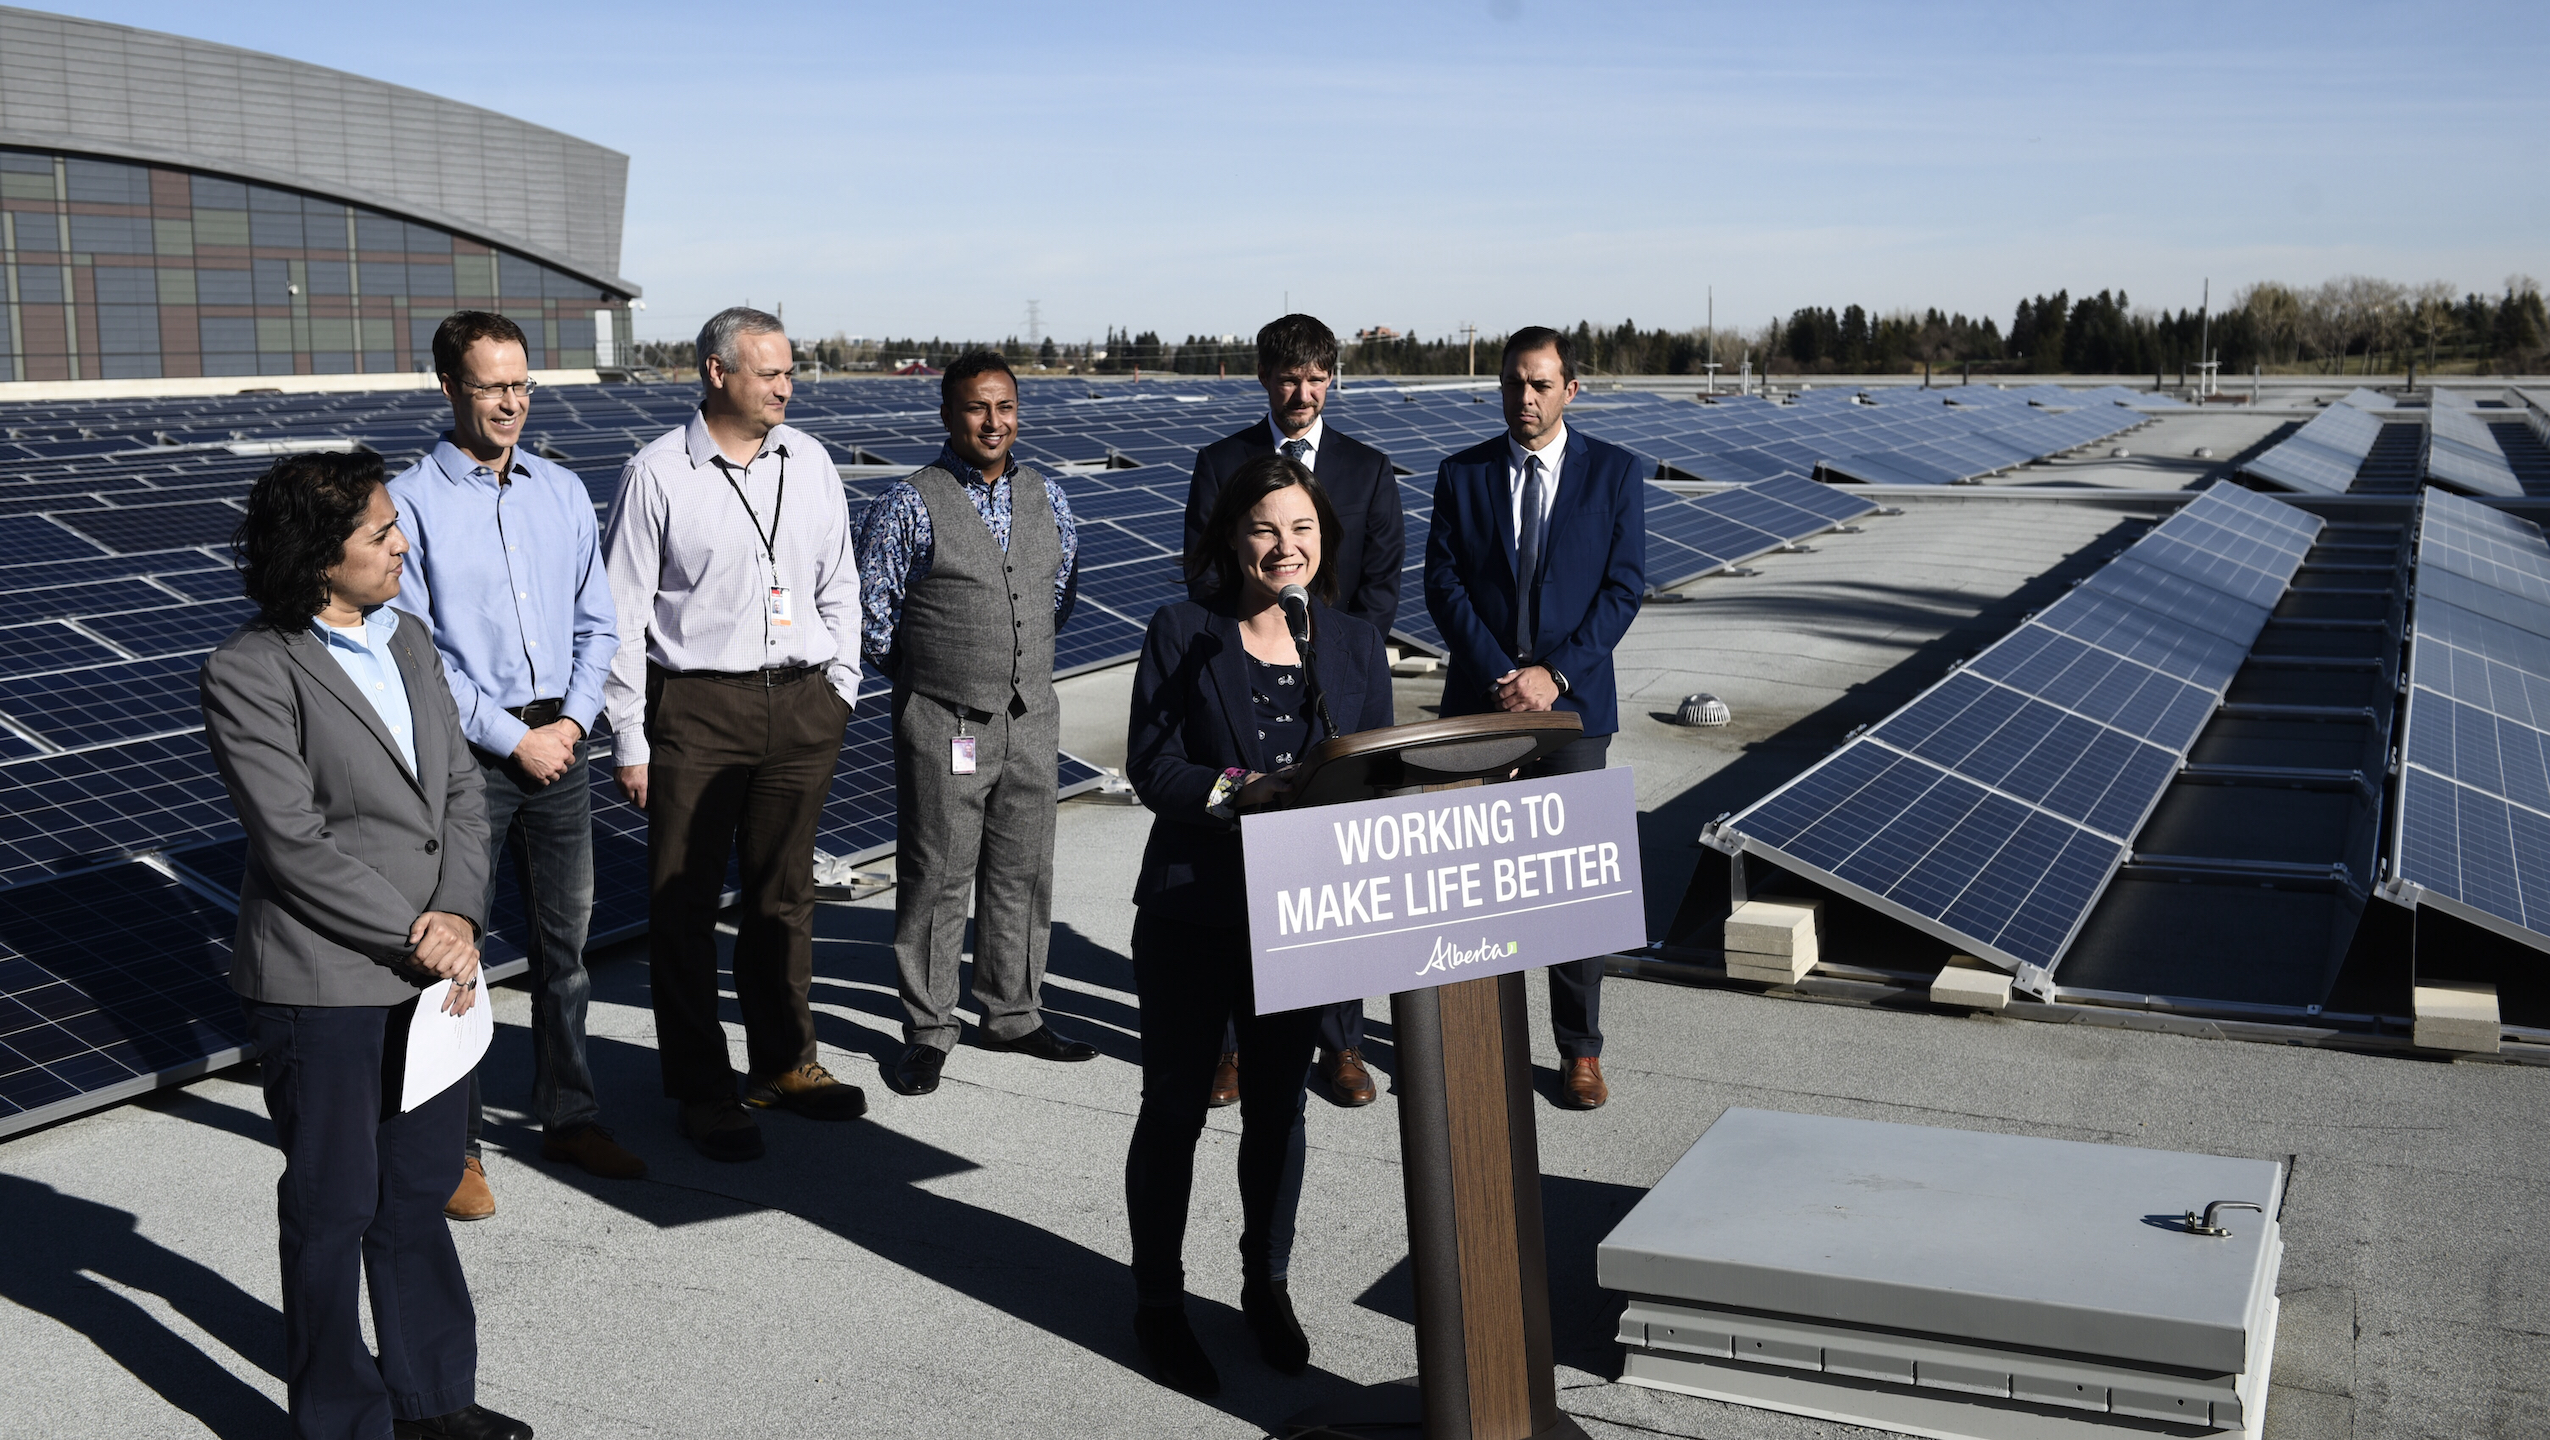 Alberta government officials announce renewable energy programs standing in front of solar array on a sunny day